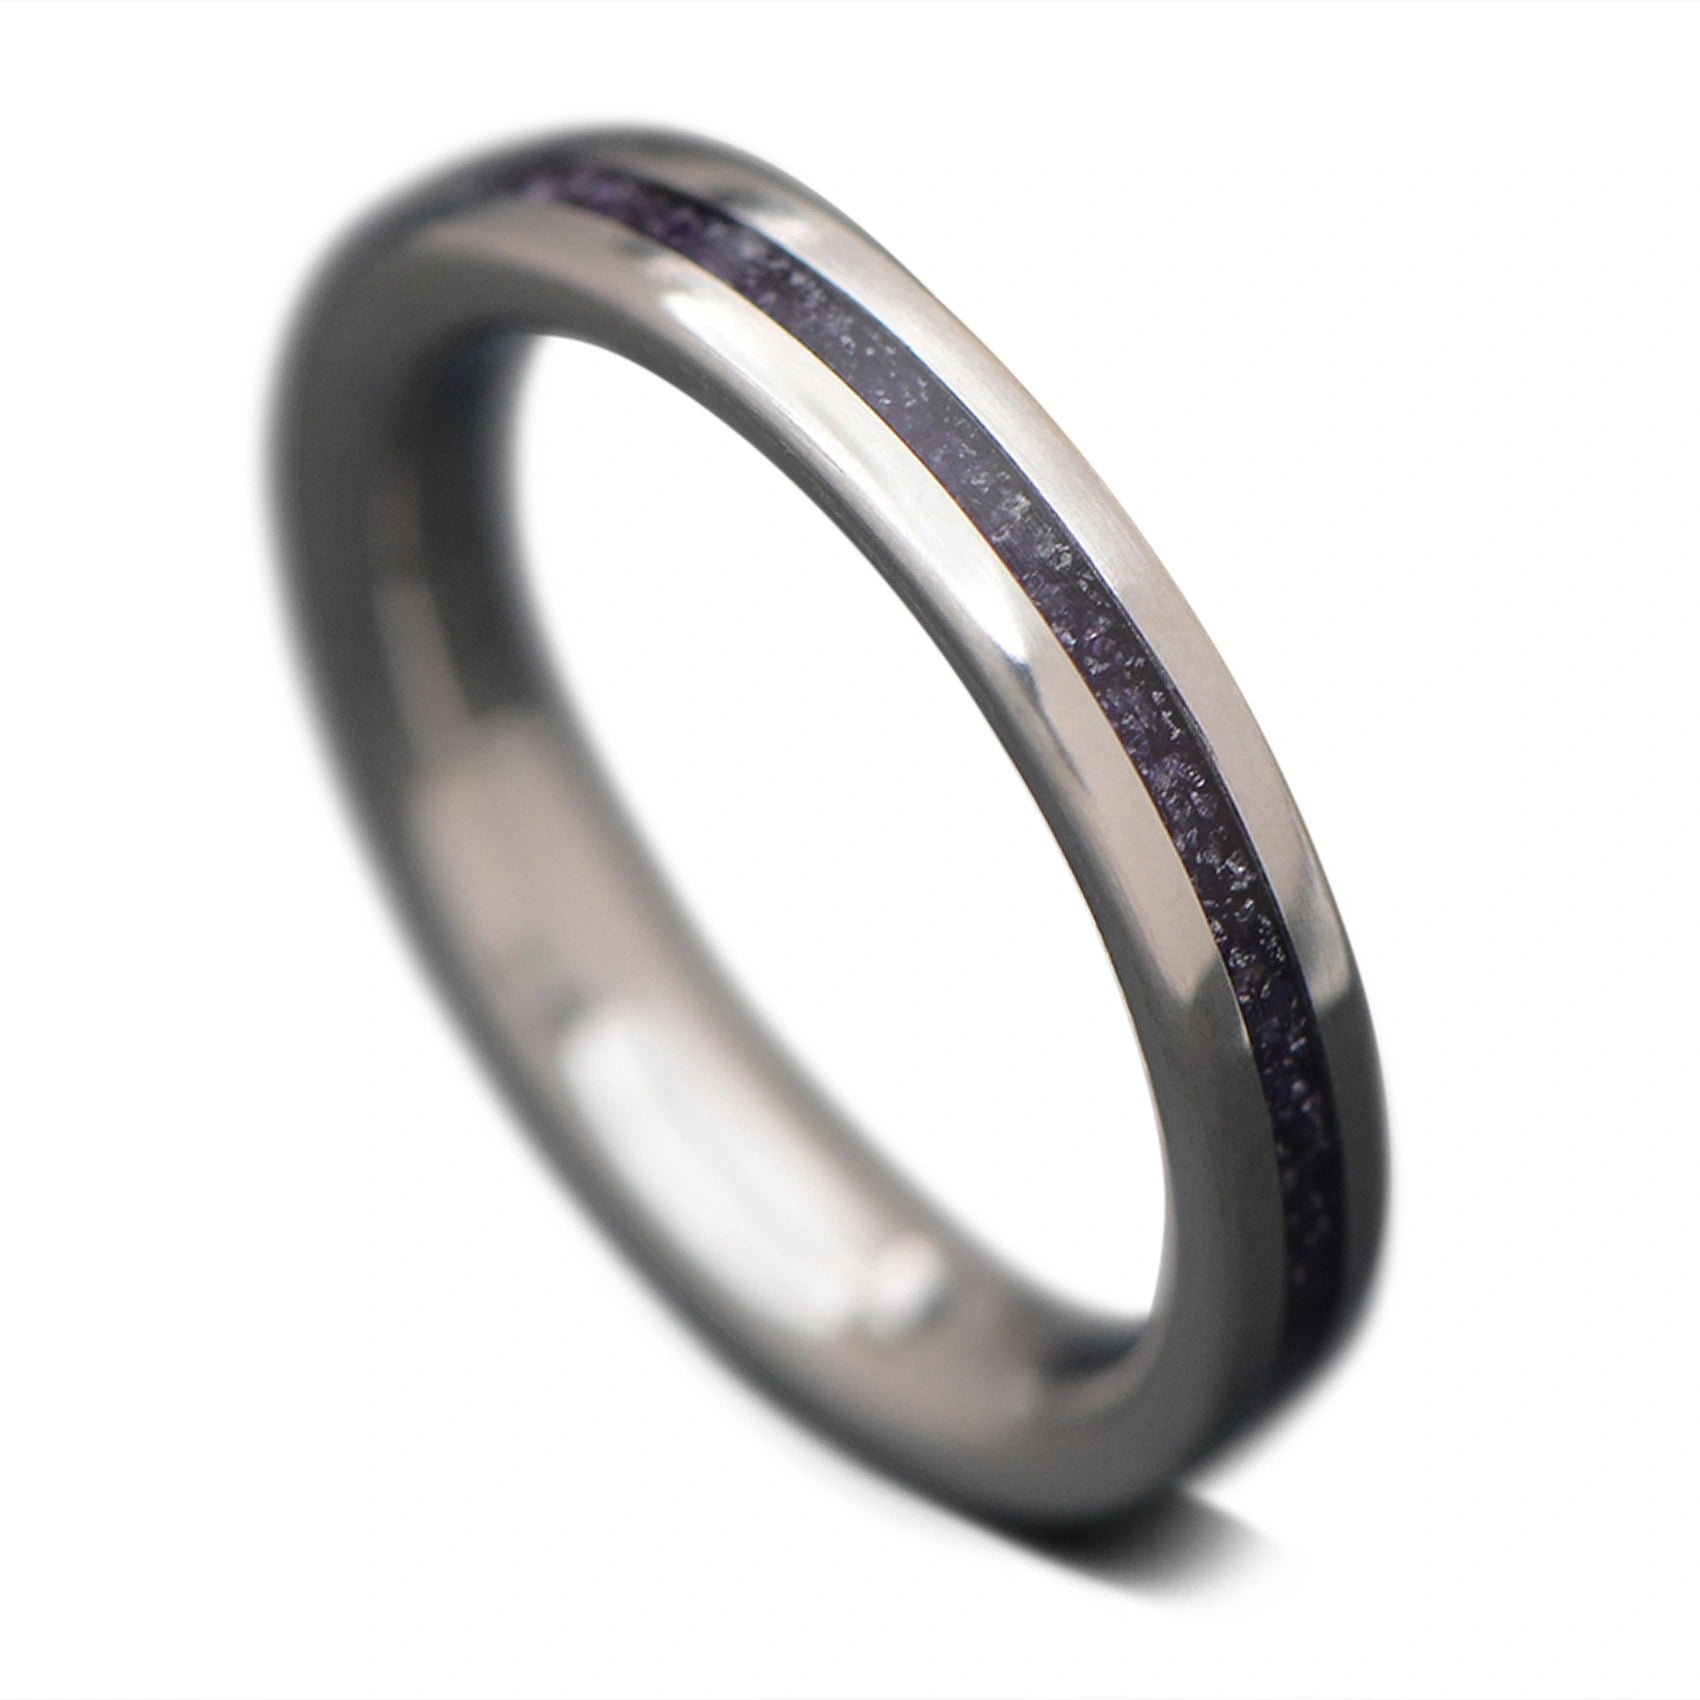 Titanium core ring with Amethyst inlay, 3mm -THE ANCHOR